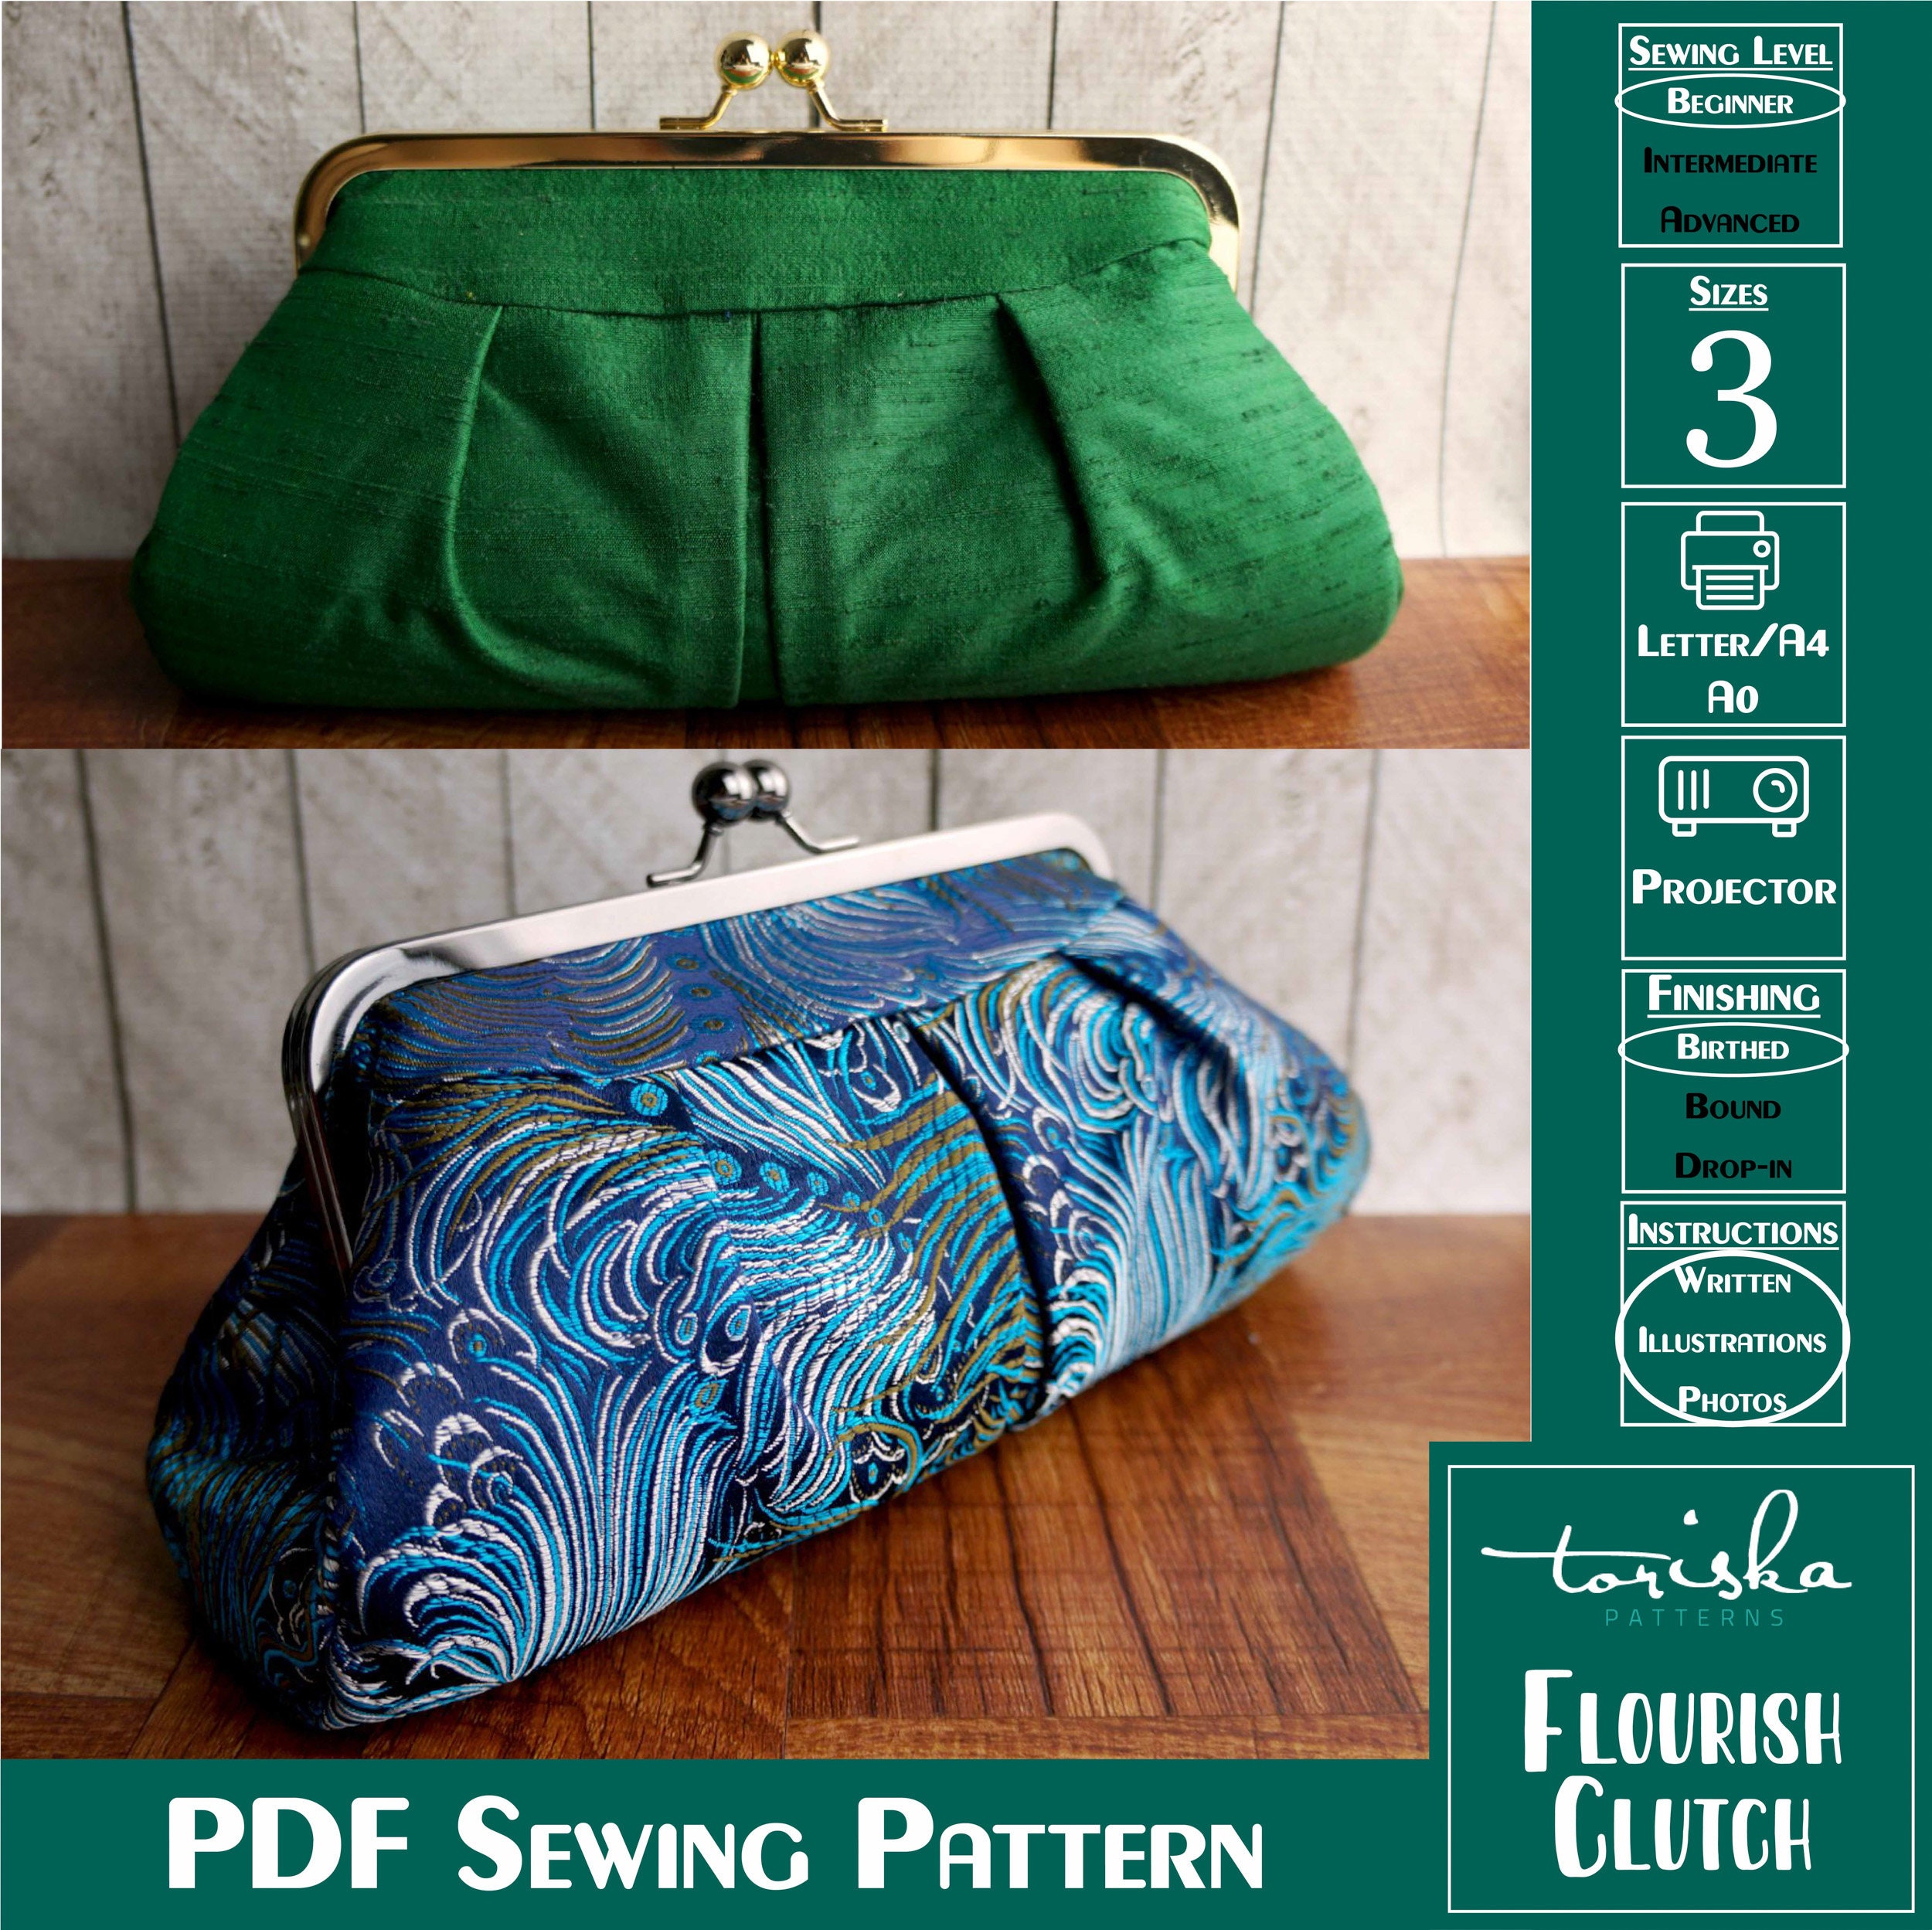 Krystal Convertible Bag PDF sewing pattern (includes SVGs and